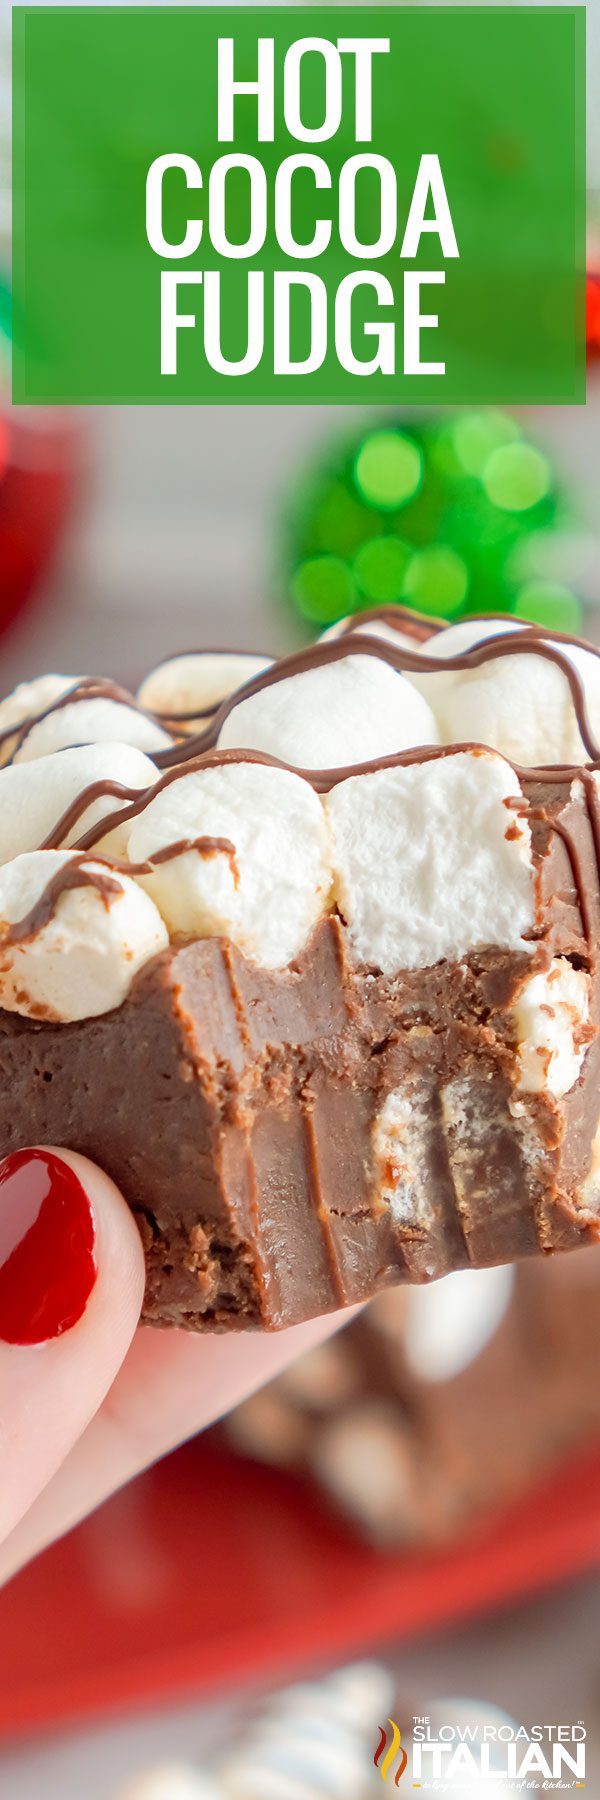 titled image (and shown): hot cocoa fudge 